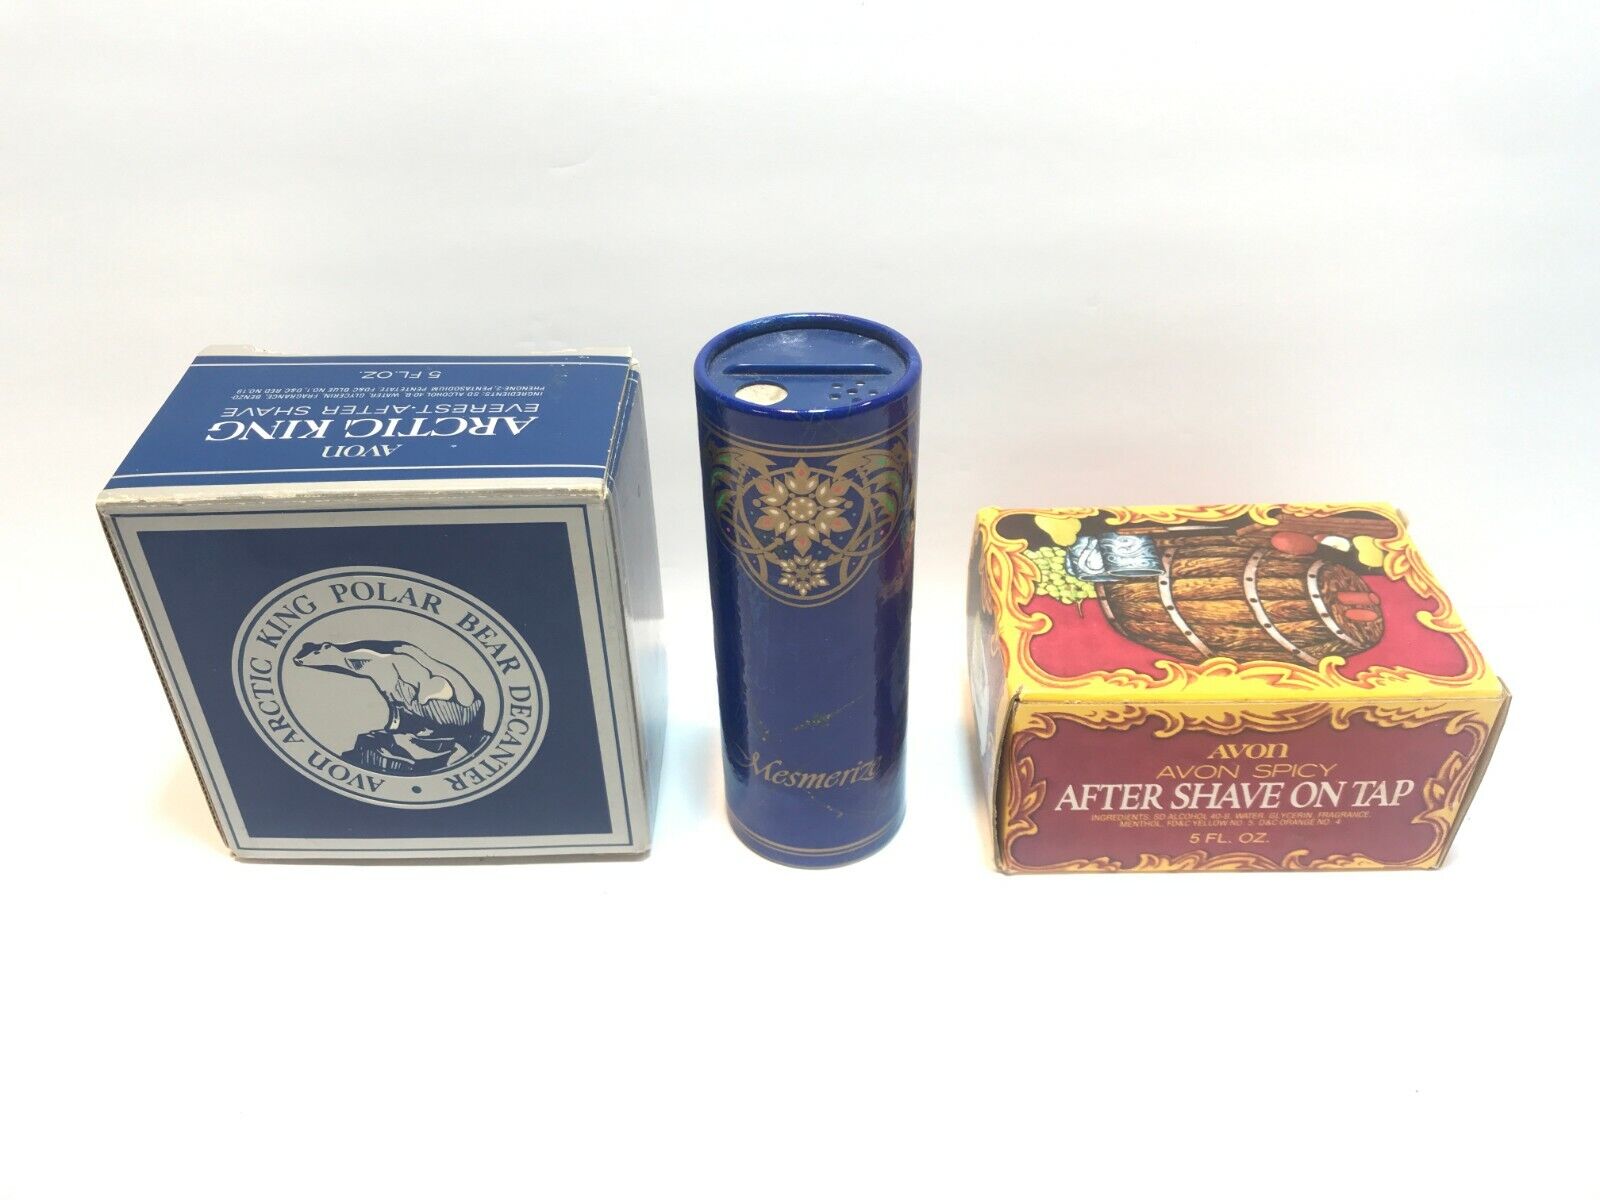 VINTAGE AVON LOT - ARCTIC KING - AFTER SHAVE ON TAP - MESMERIZE - NEW